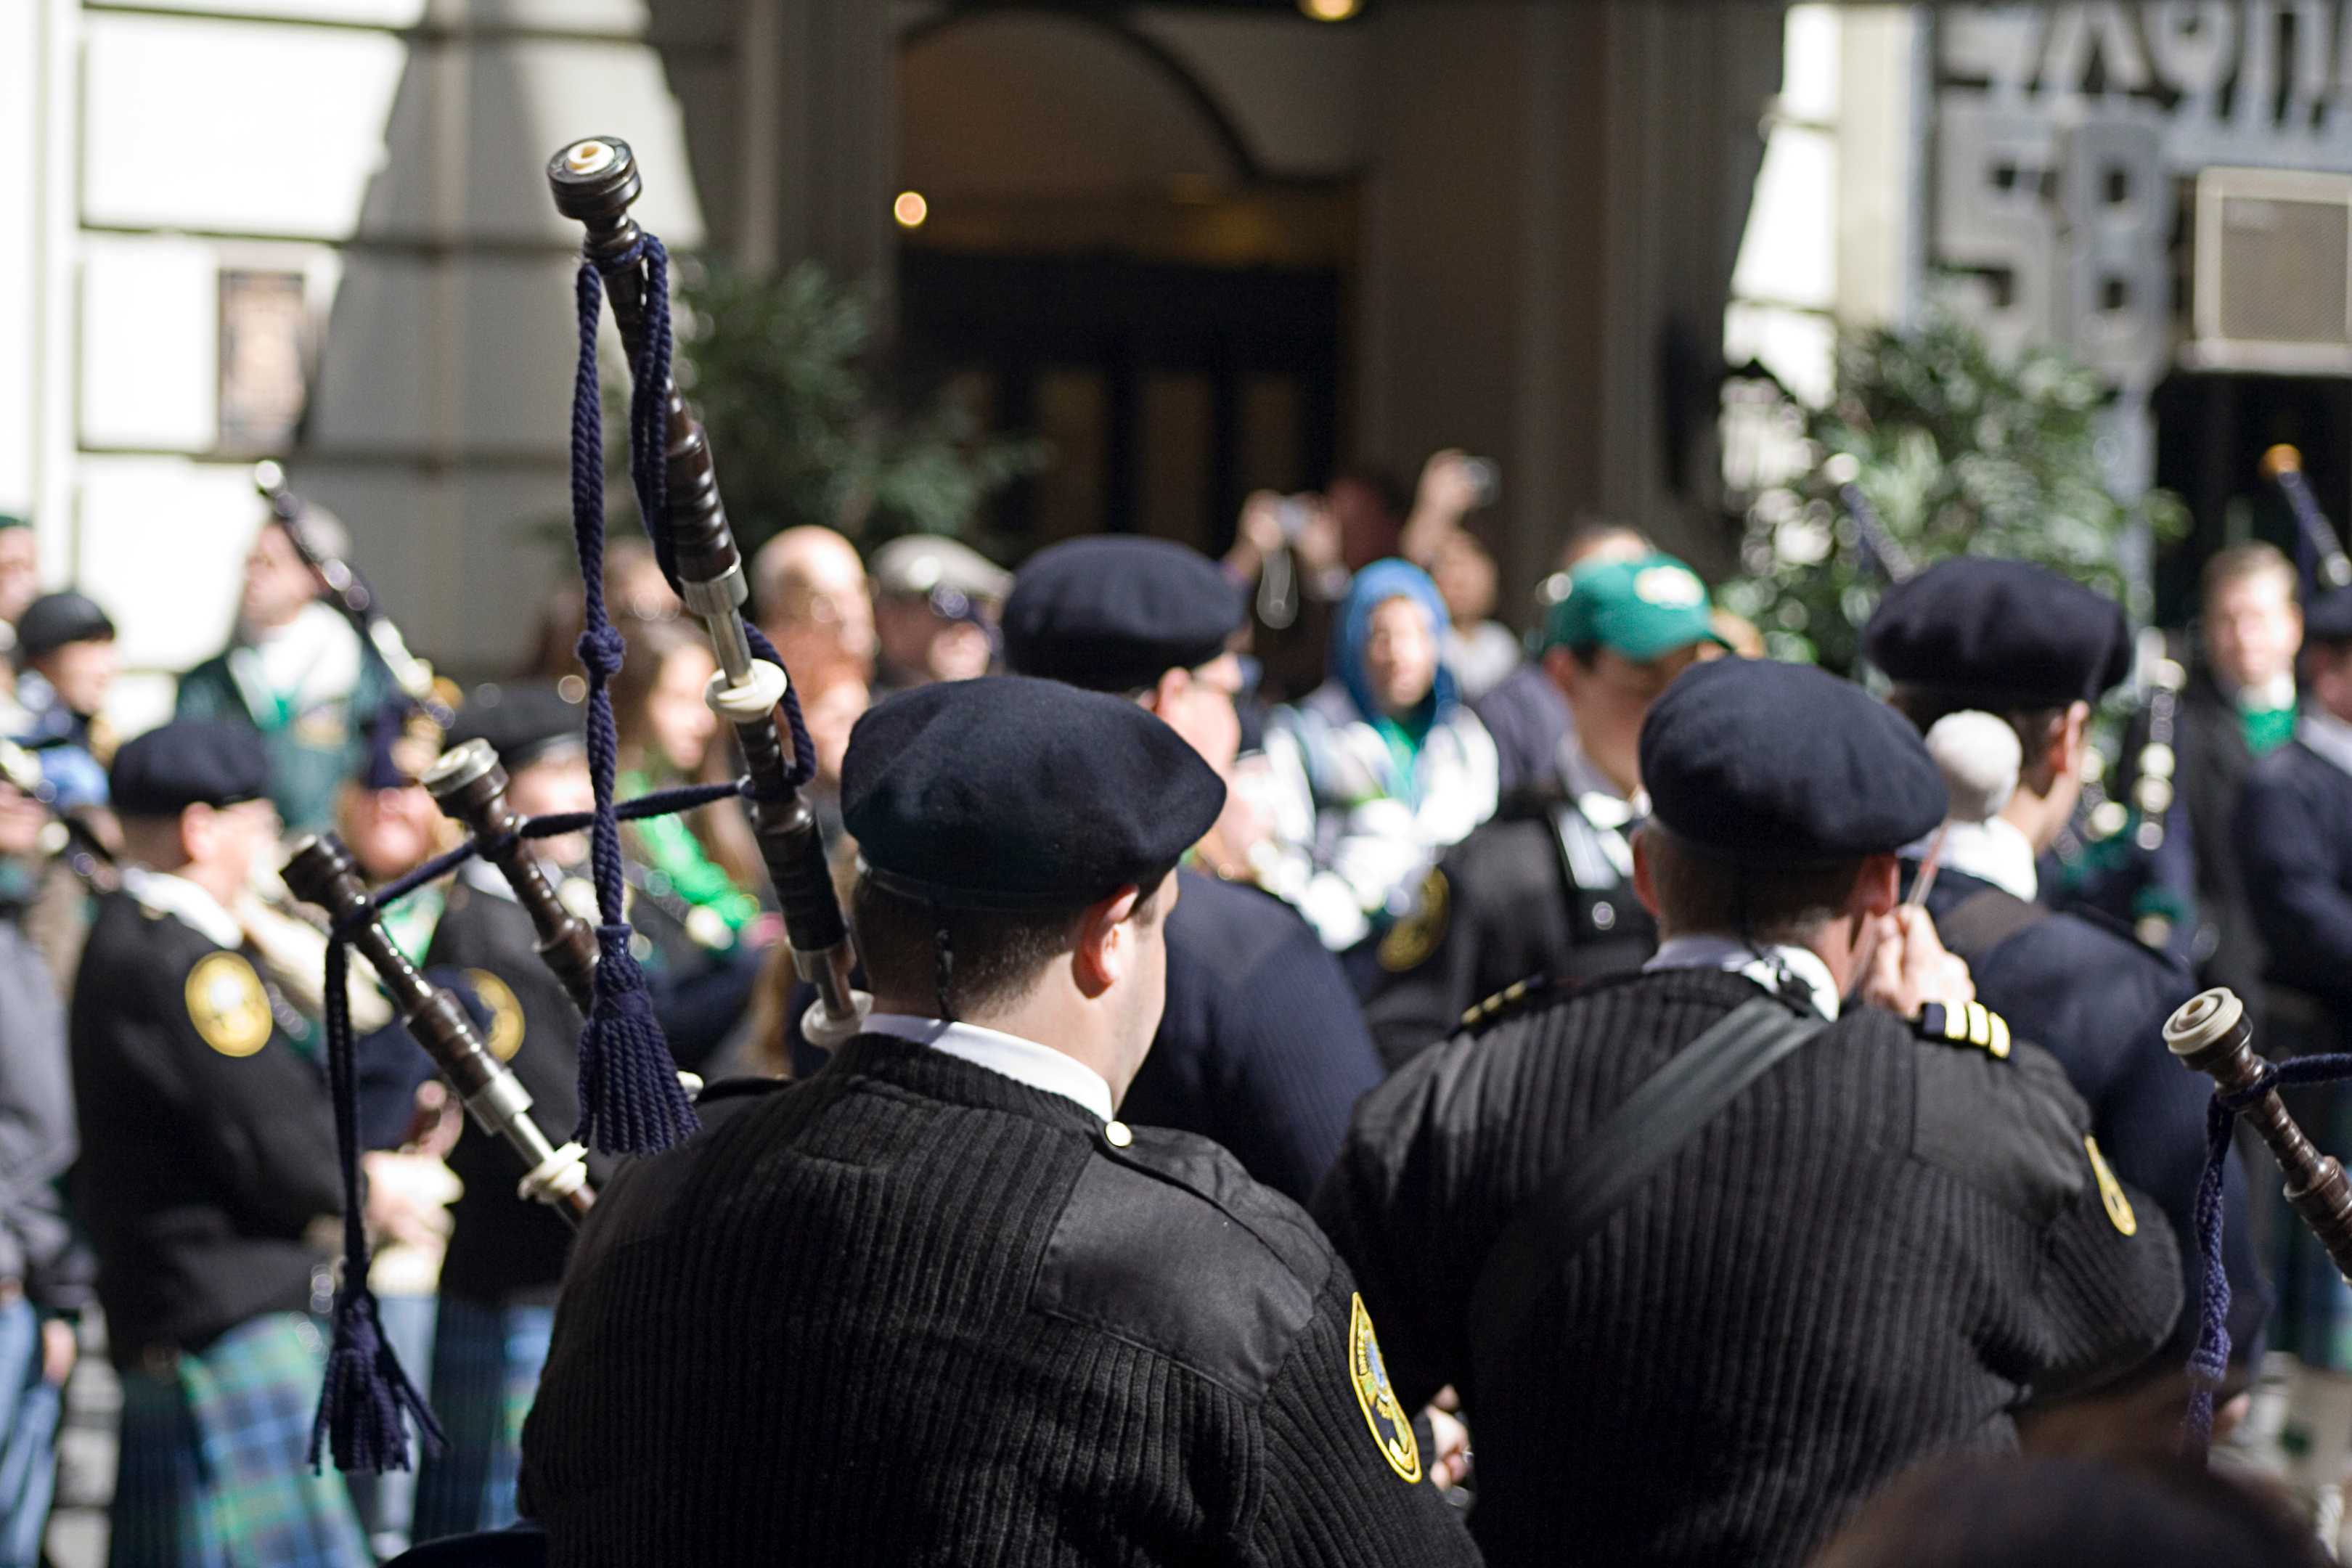 People playing bagpipes at a St. Patrick's Day parade